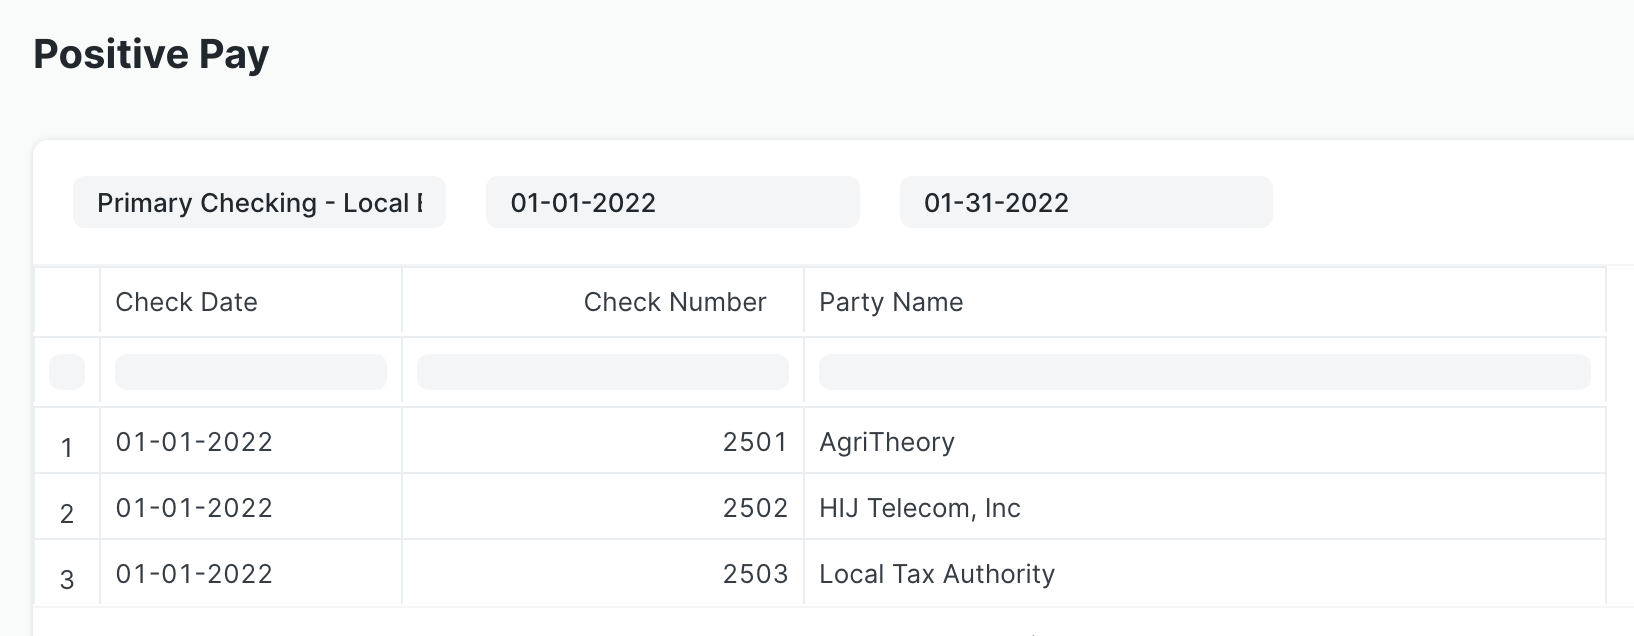 Screen shot of an example Positive Pay report showing columns for Check Date, Check Number, and Party Name.